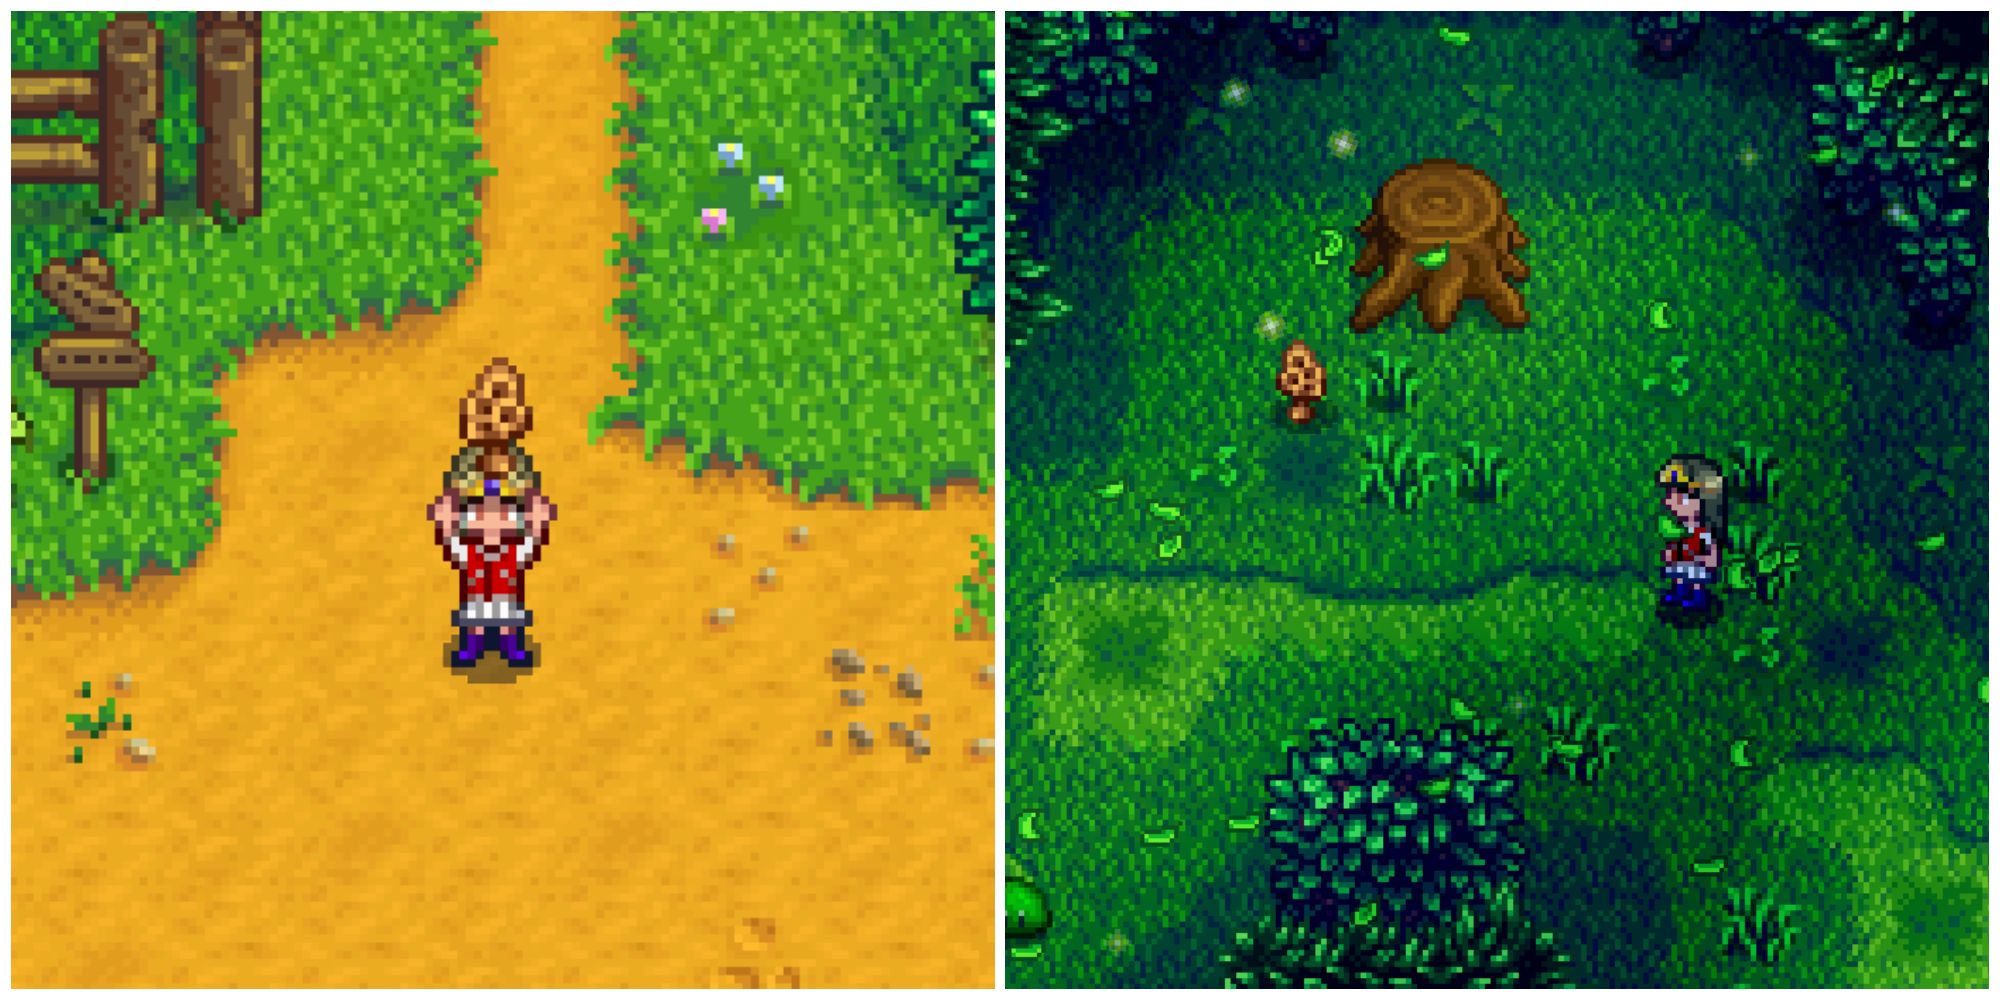 Split image of a character holding a Morel and a character visiting the secret woods in Stardew Valley